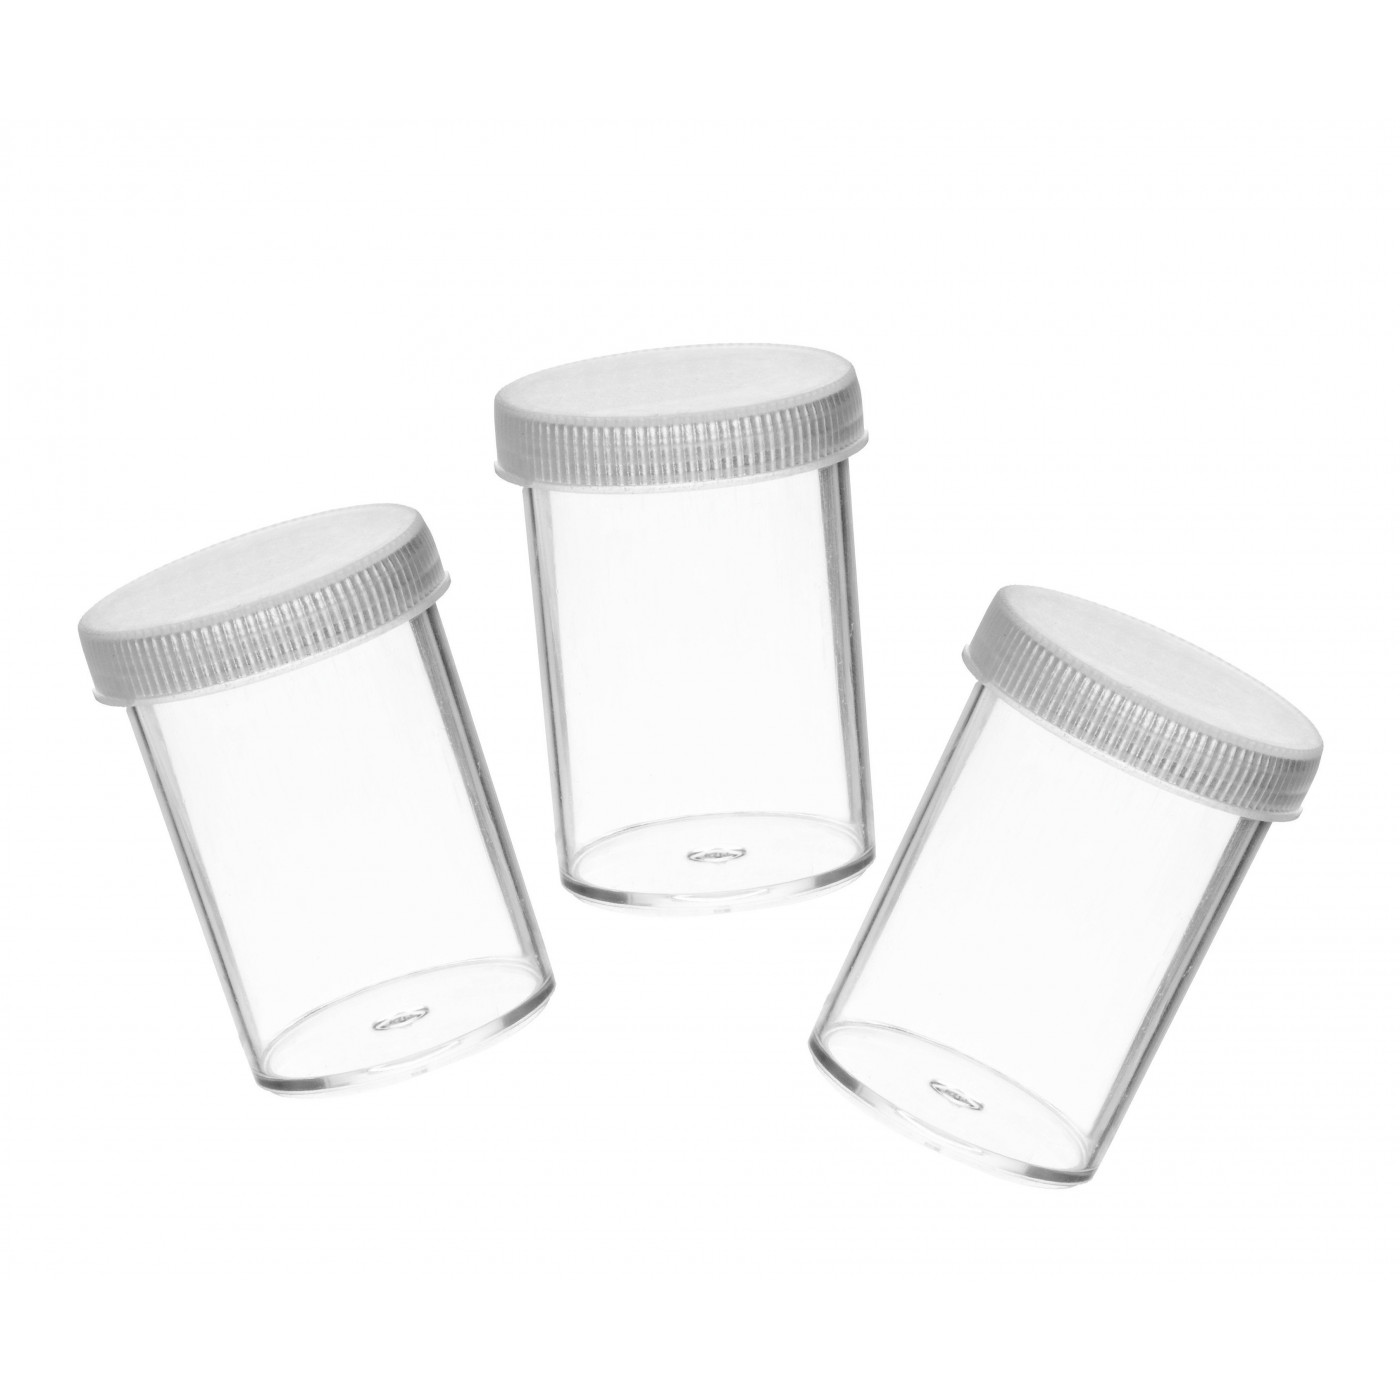 Set of 30 sample containers, 20 ml with screw caps